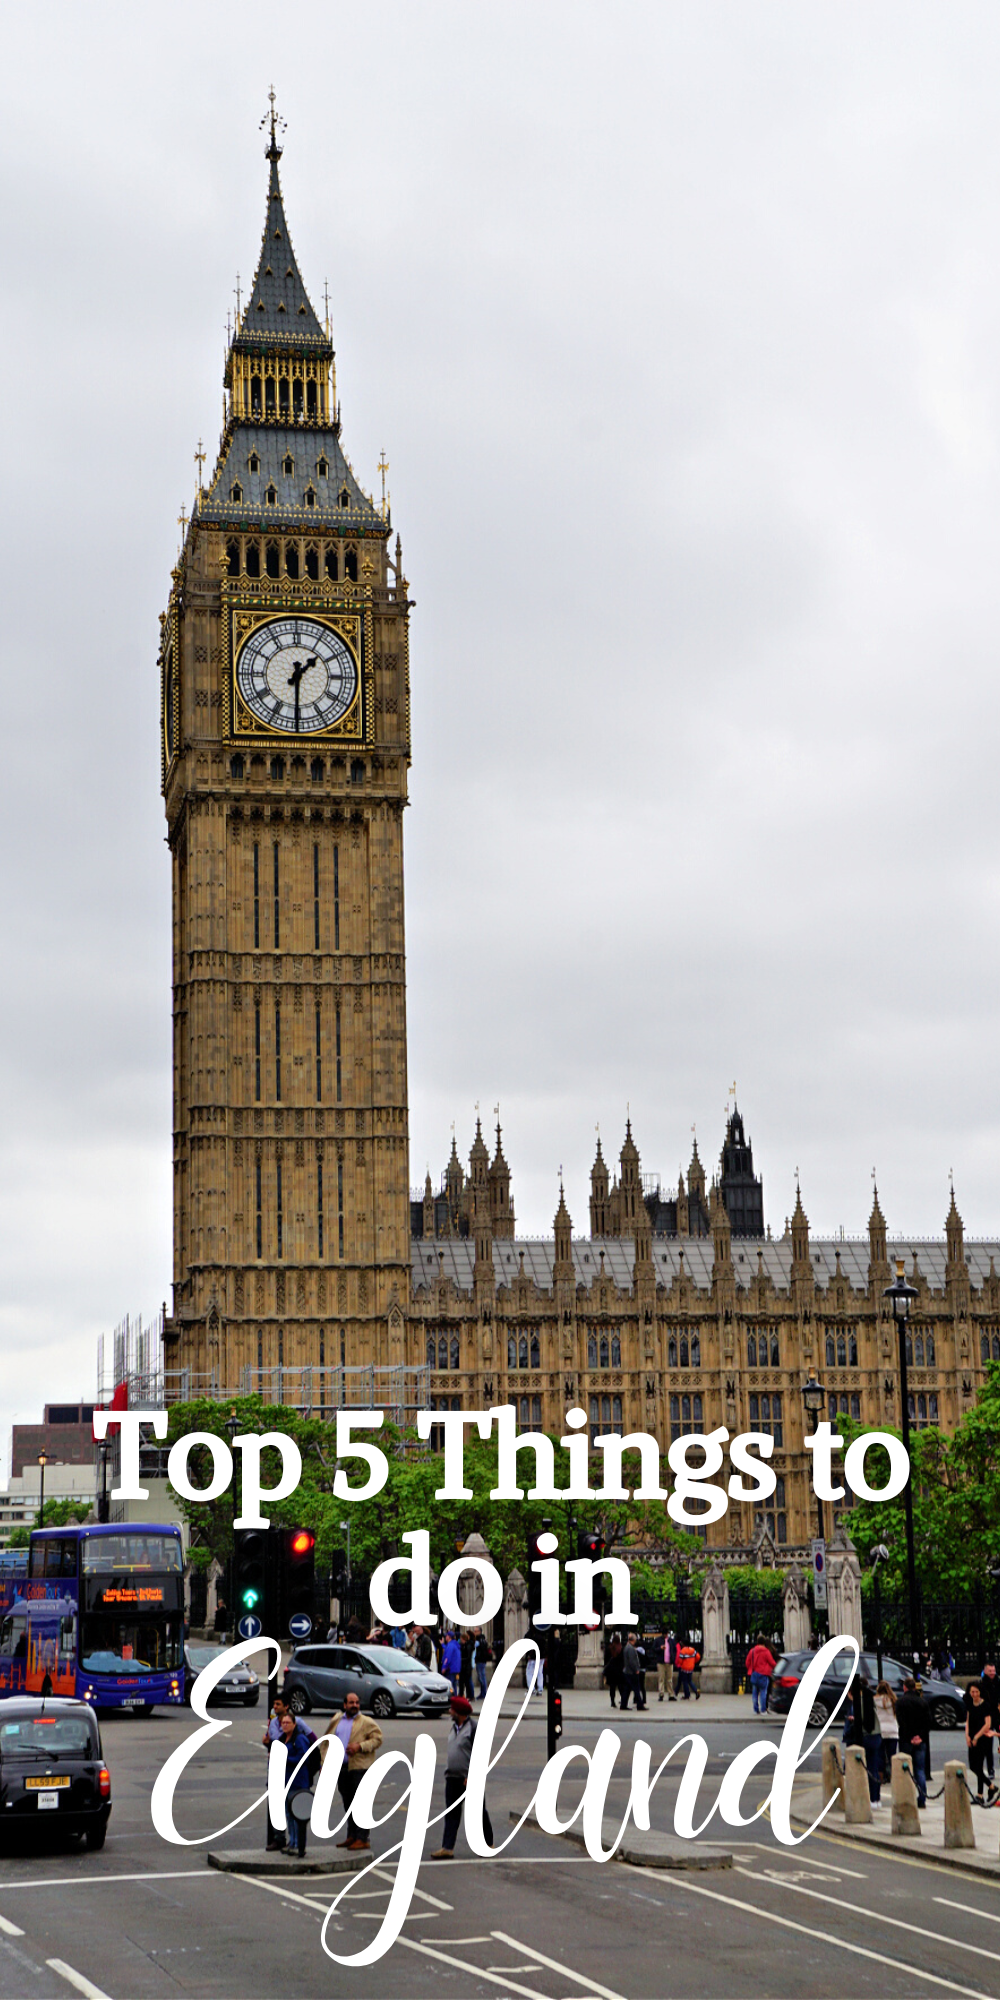 Top 5 Things to do in England